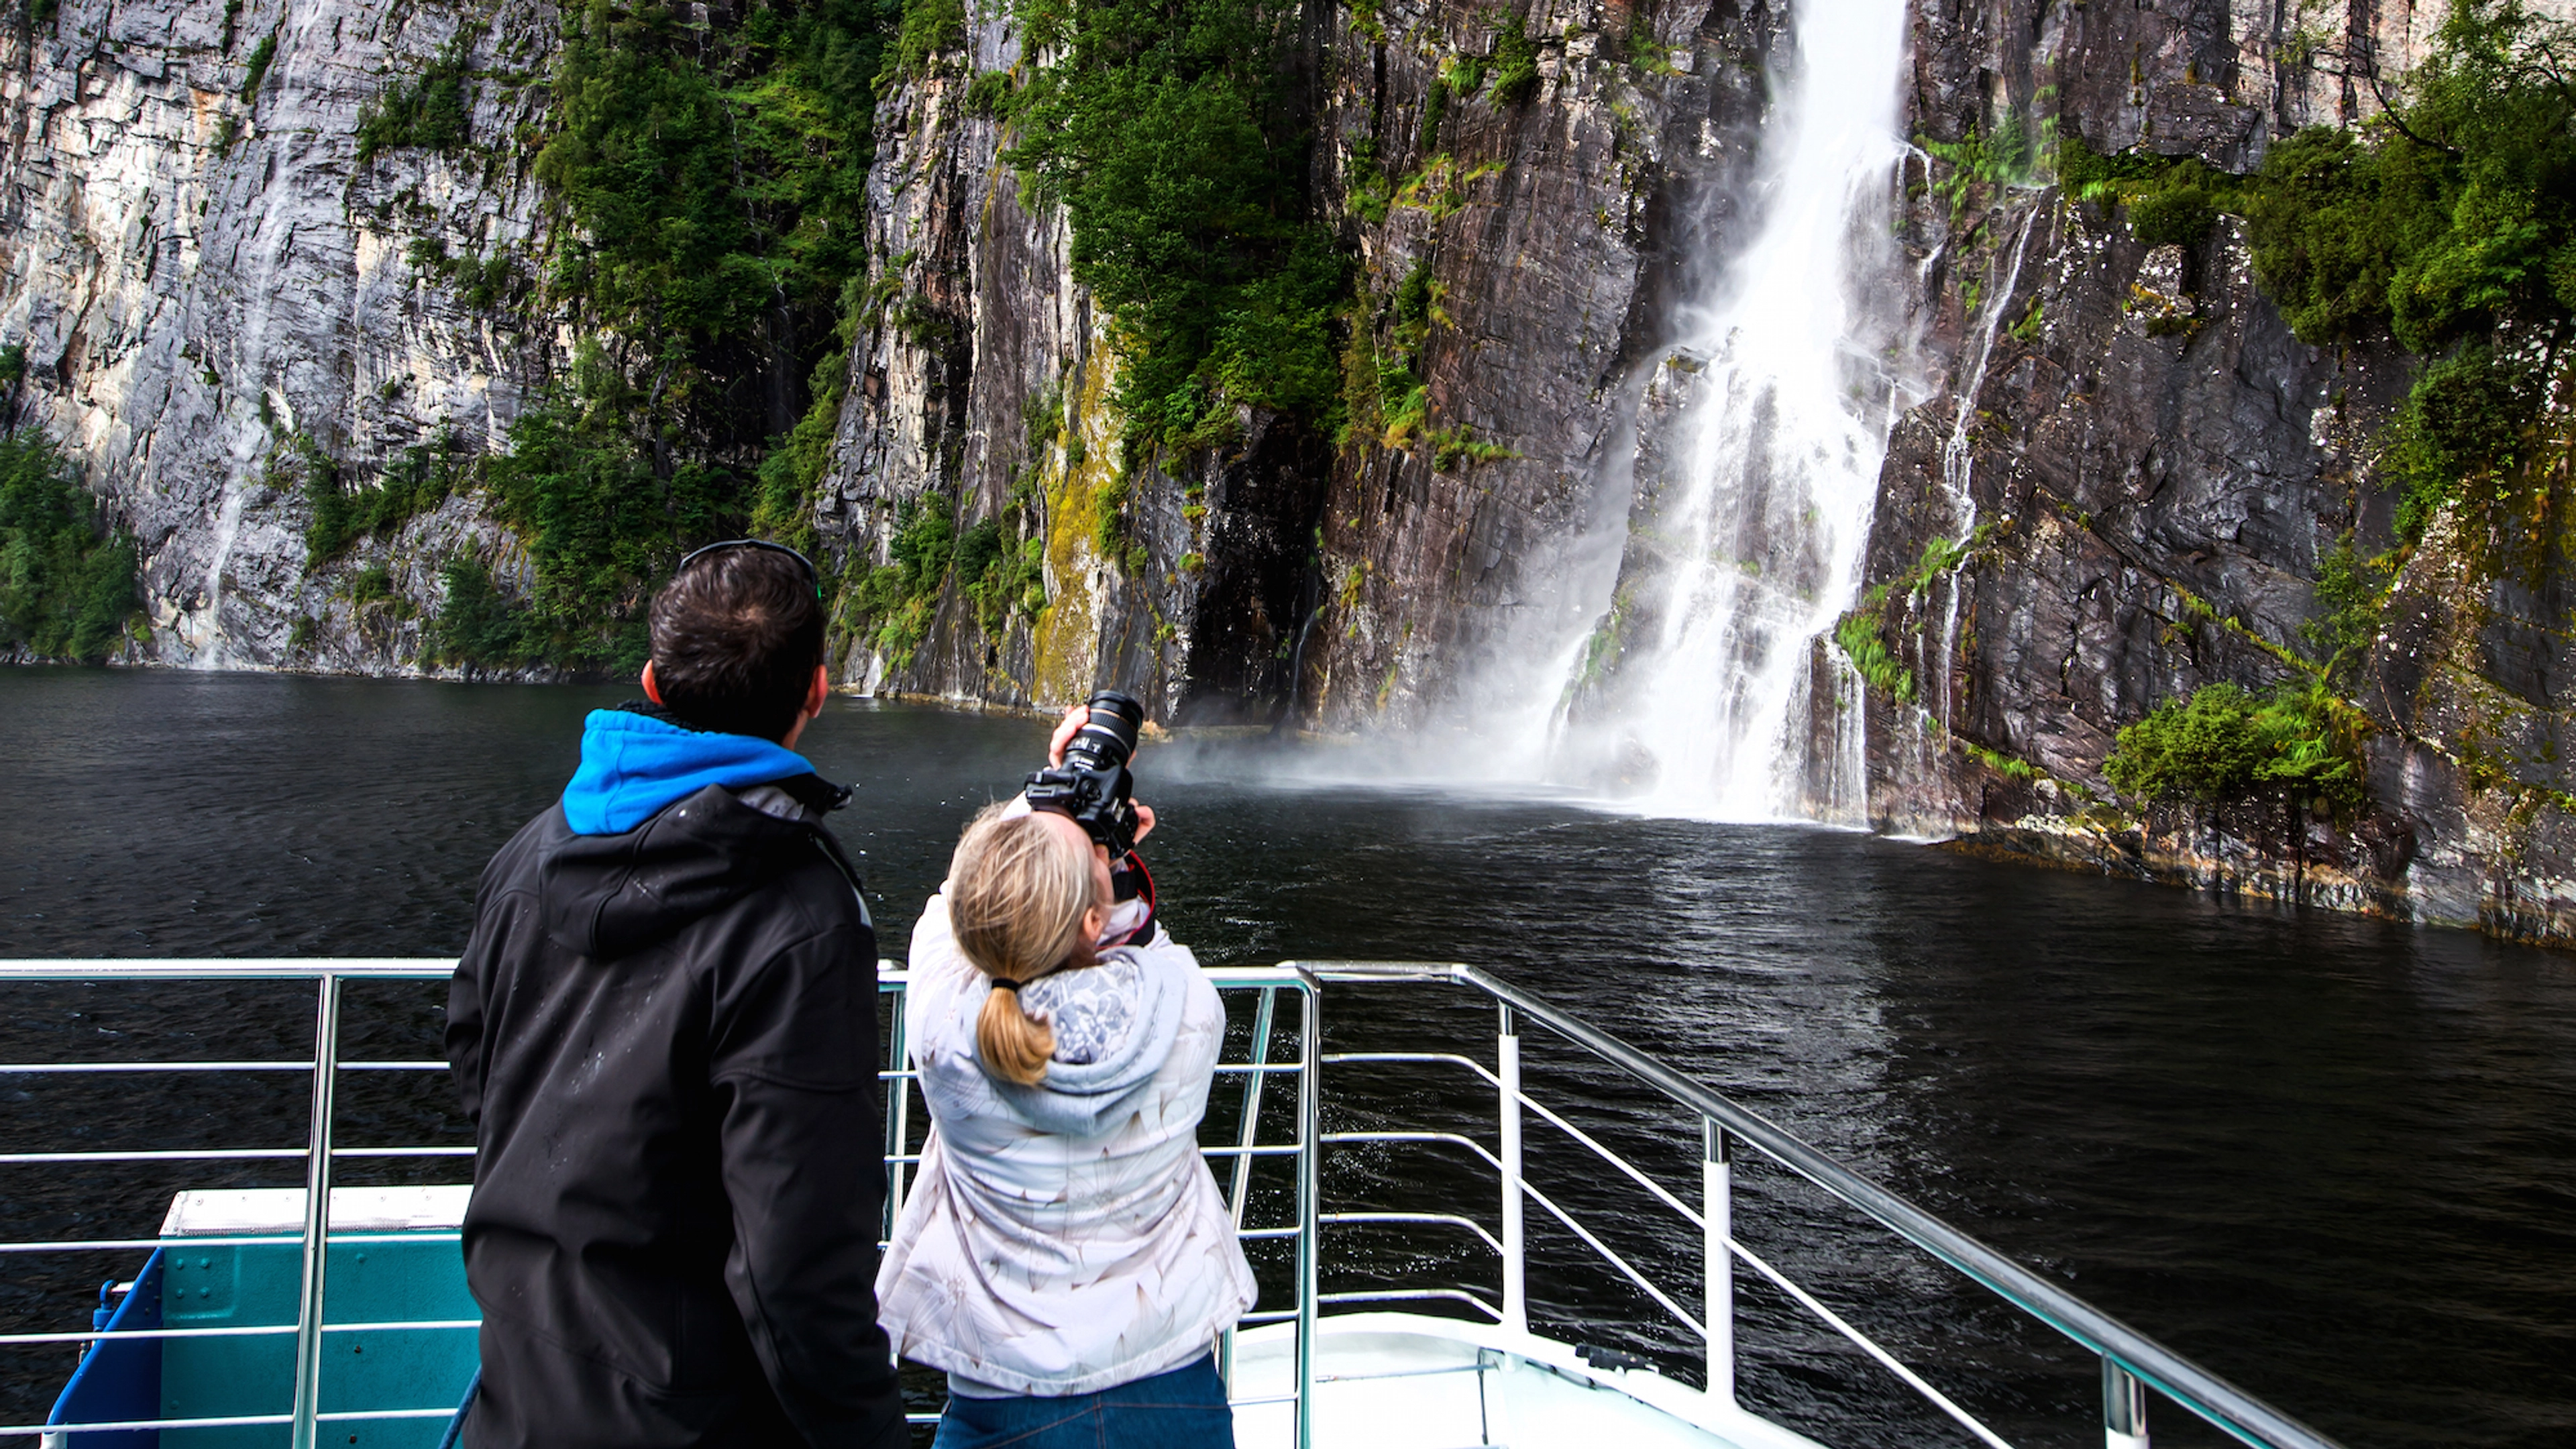 Photo stop on Fjordcruise to Mostraumen - Bergen, Norway